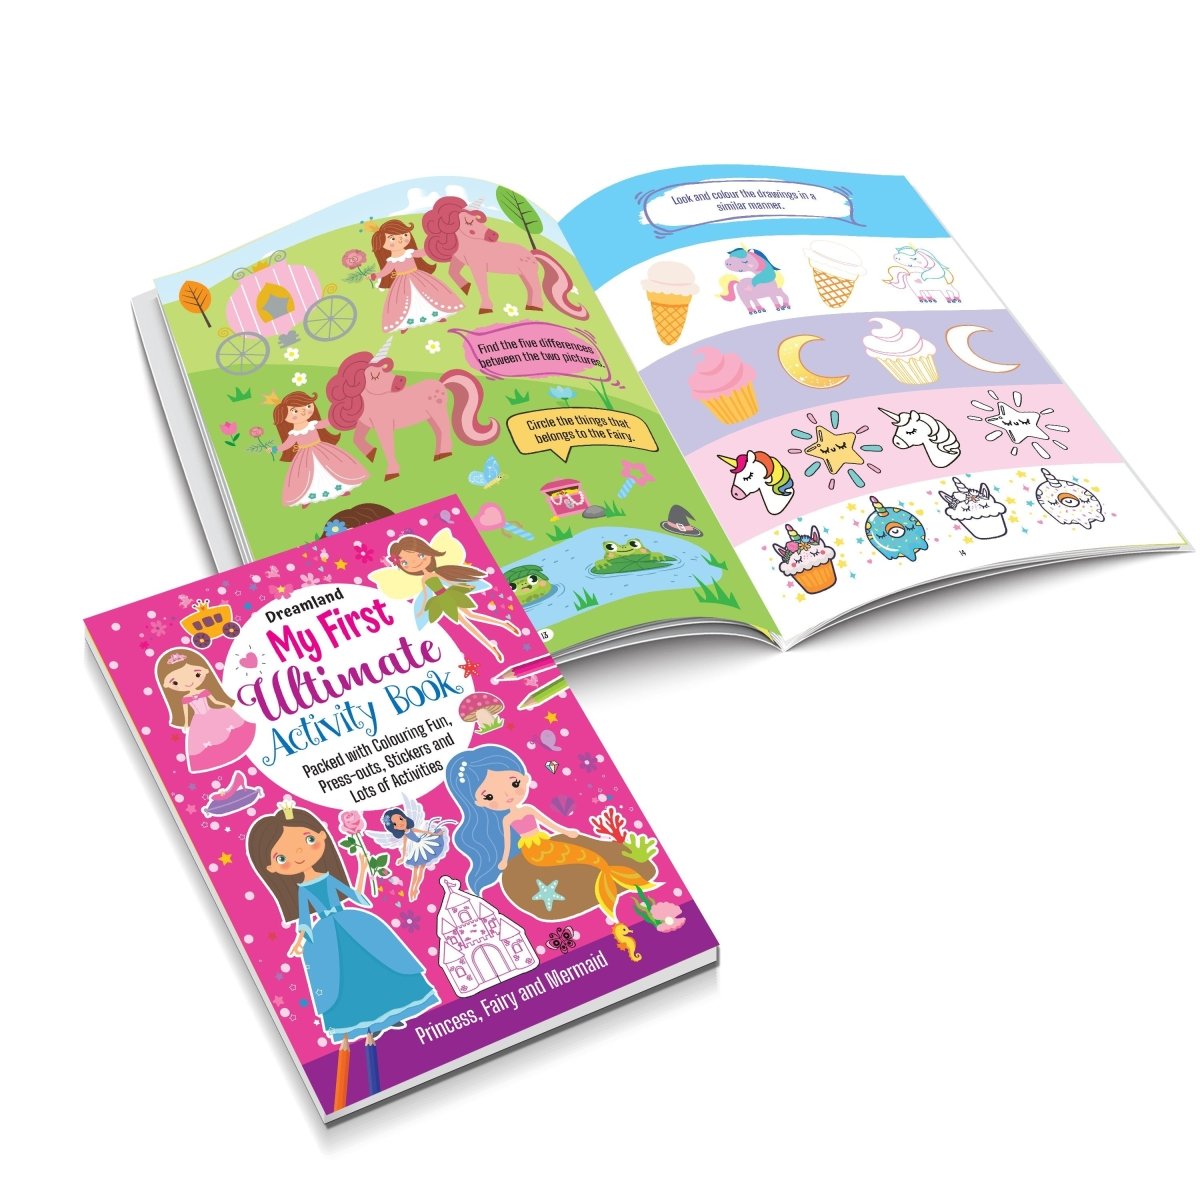 Dreamland Publications My First Ultimate Activity Book- Princess, Fairy And Mermaid - 9789388371896